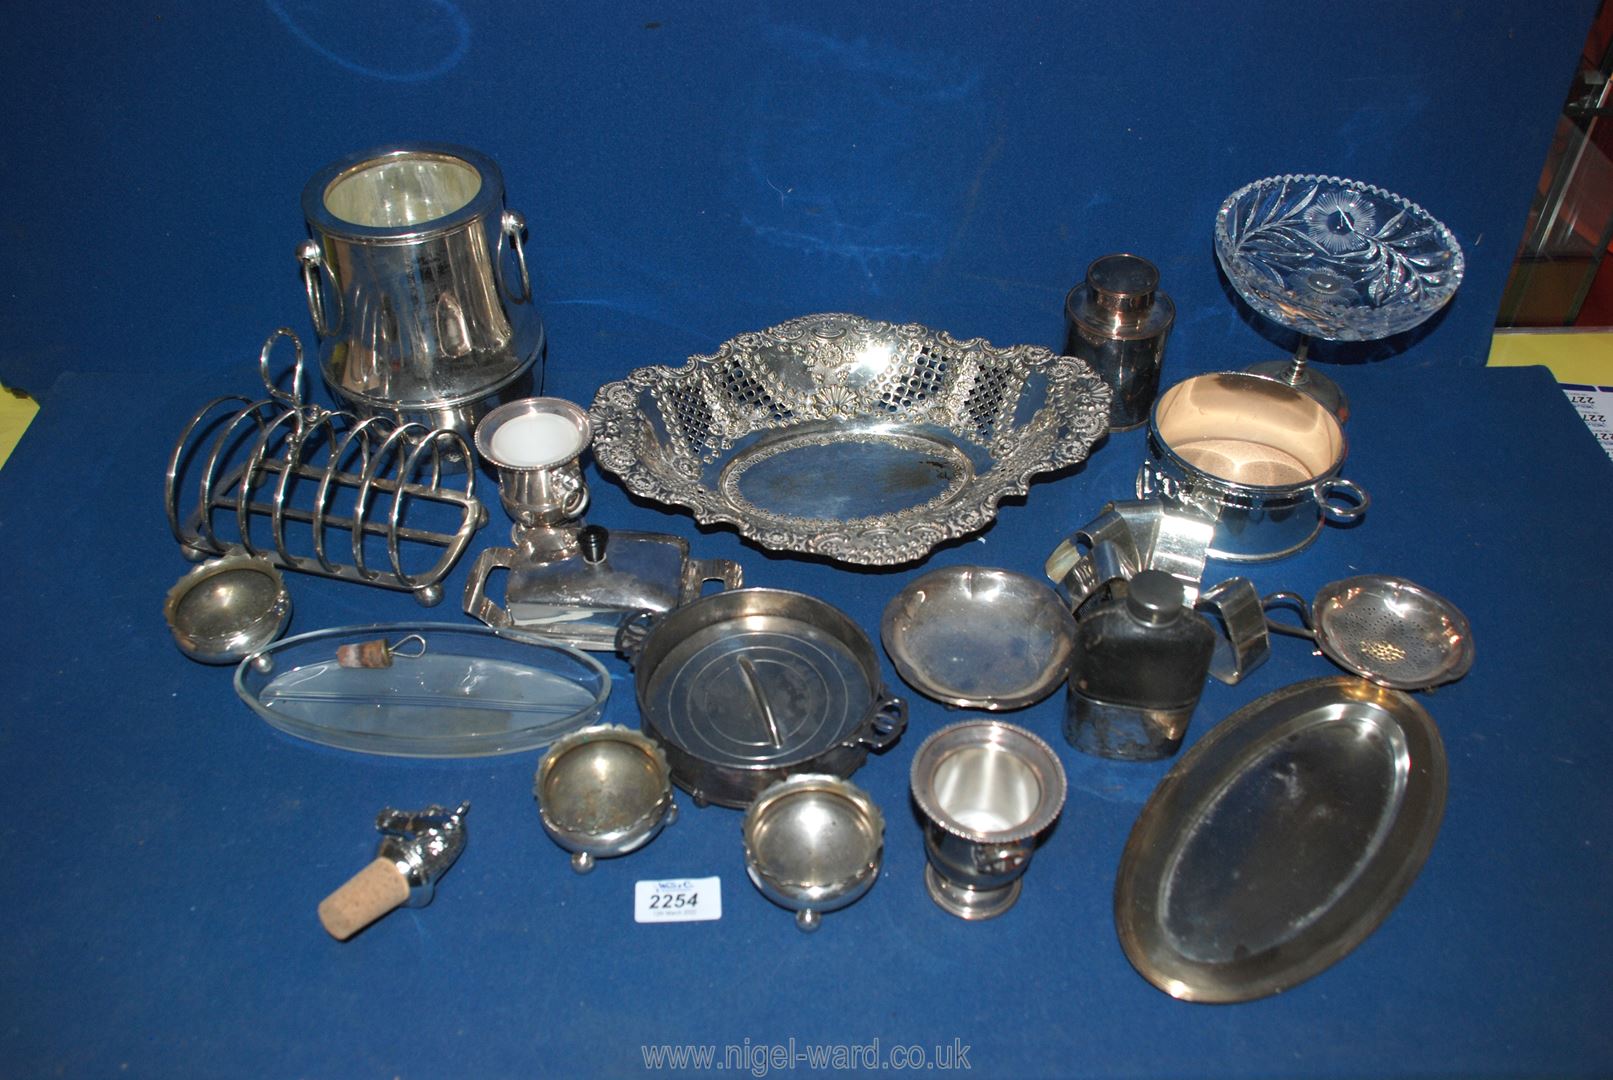 A box of various silver plate including an ice bucket, toast rack, napkin rings etc.